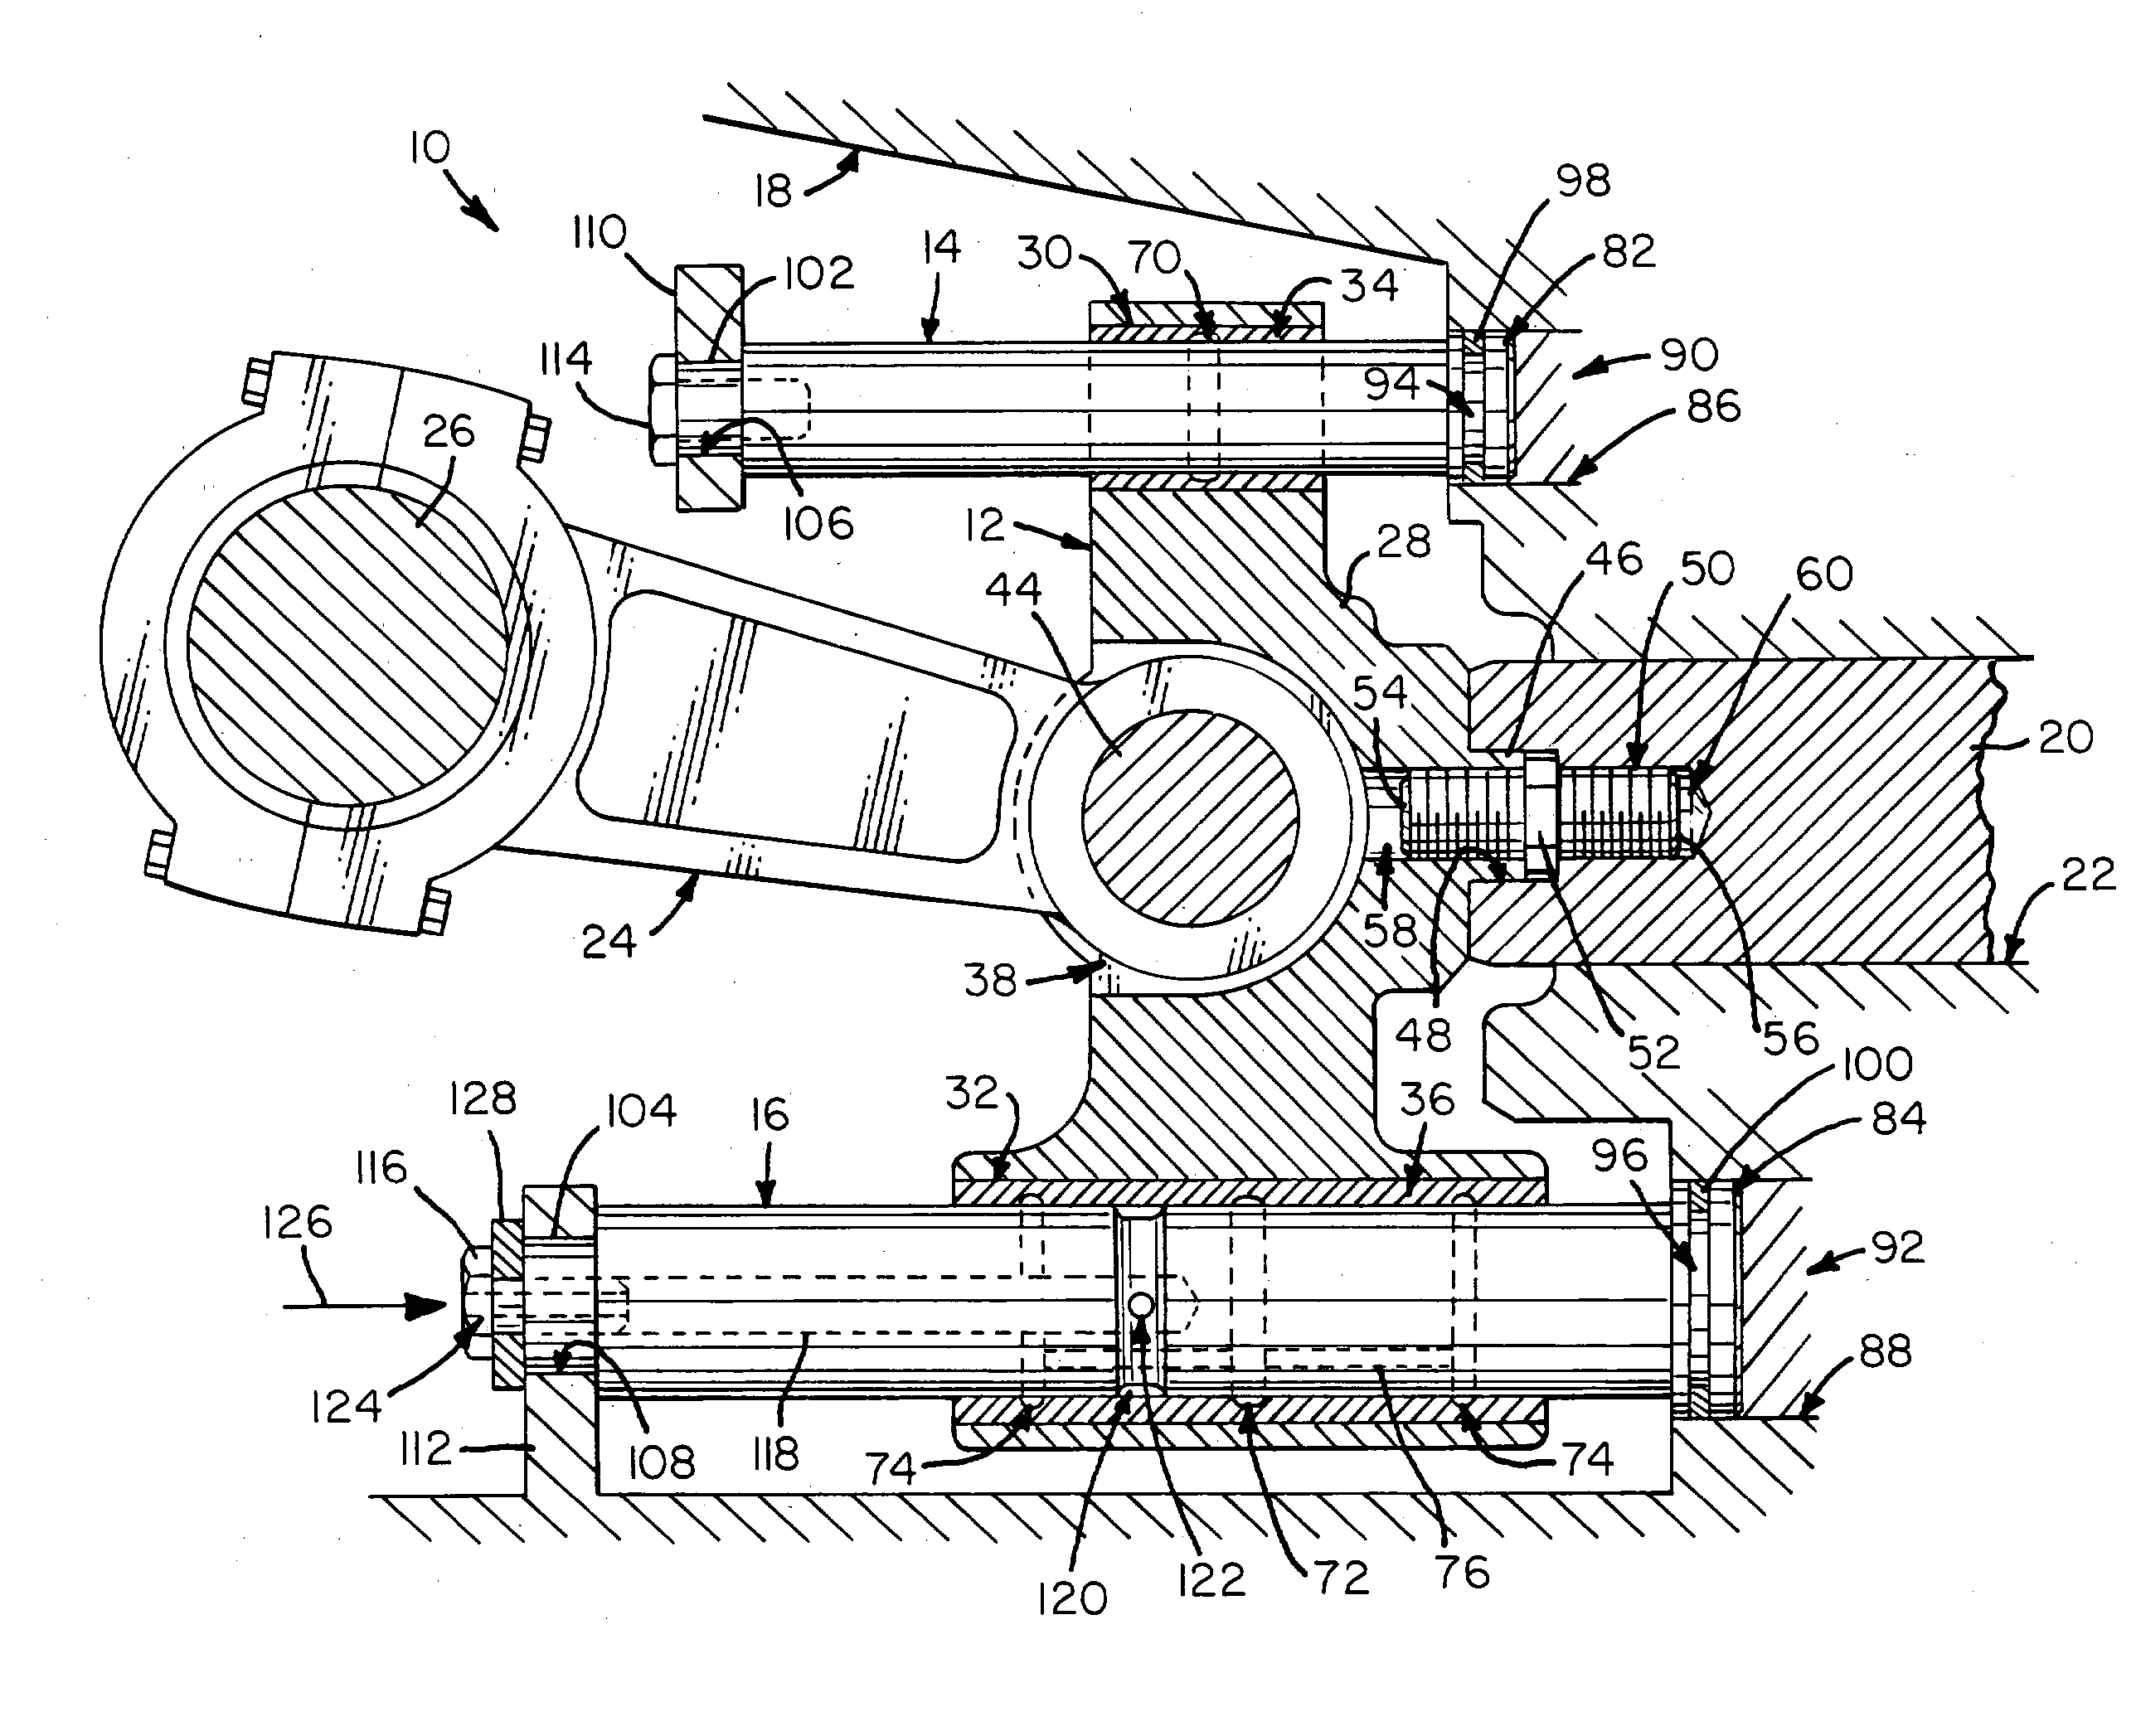 Rod-guided crosshead assembly